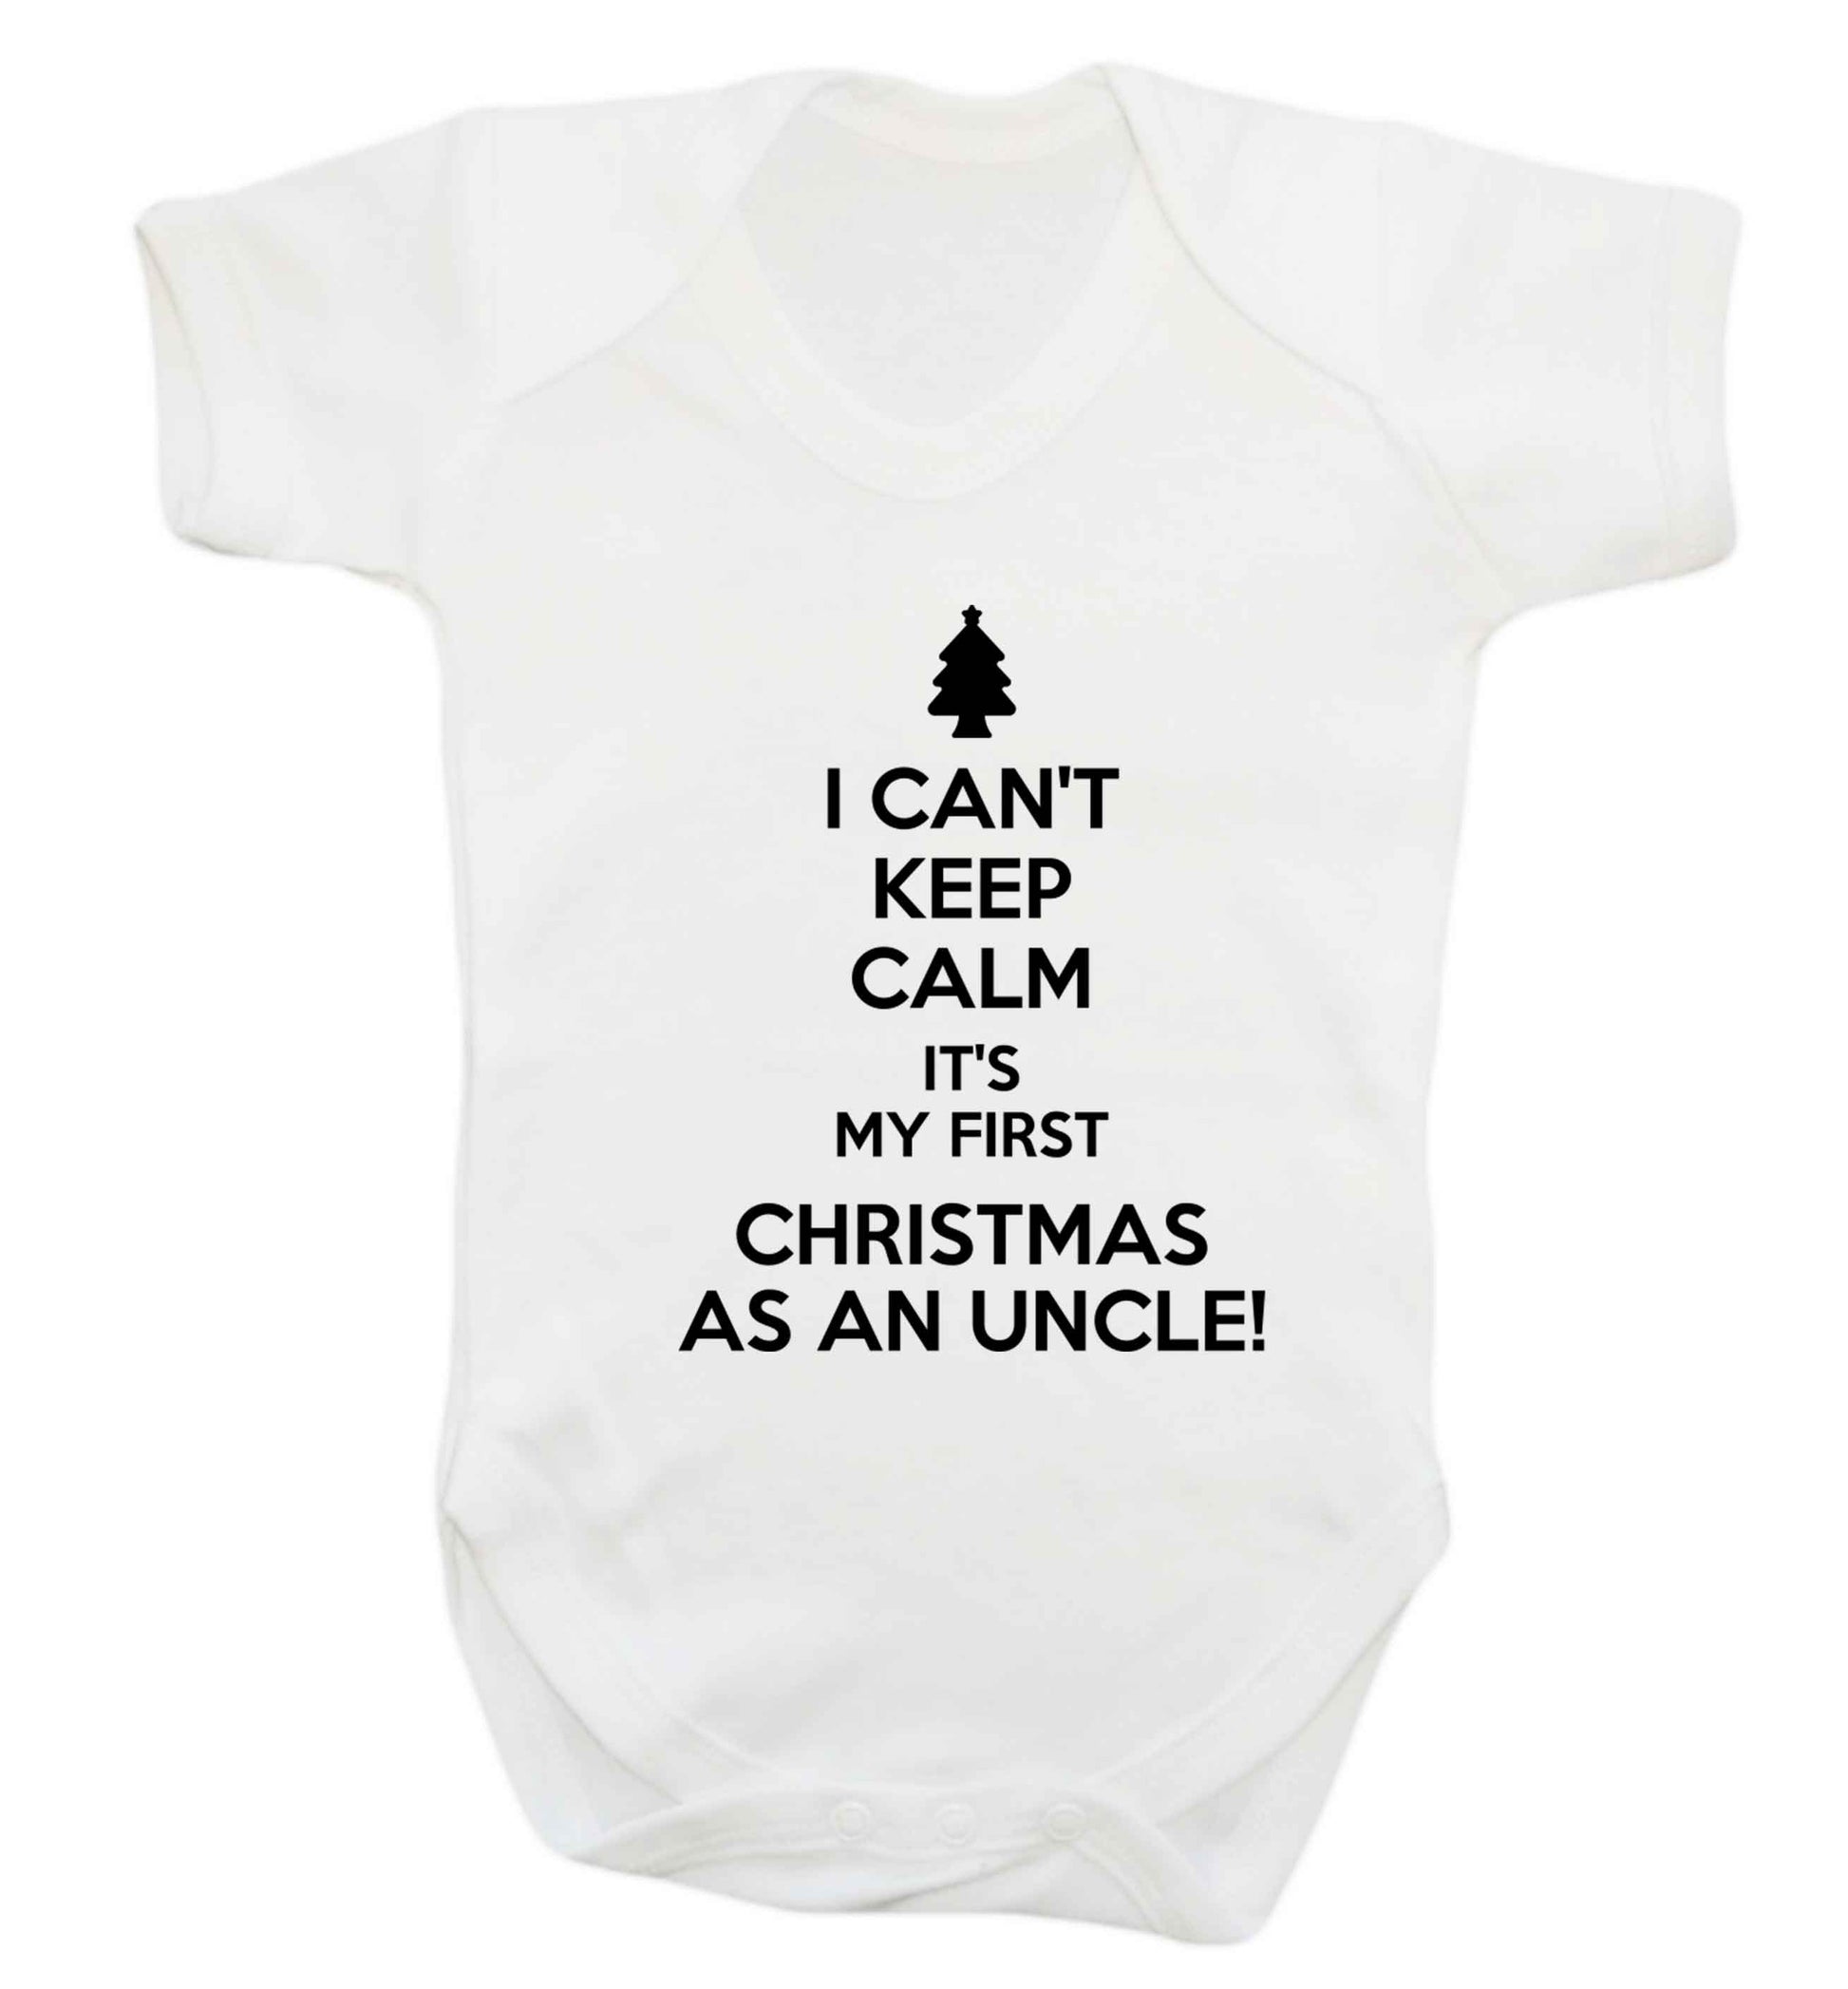 I can't keep calm it's my first Christmas as an uncle! Baby Vest white 18-24 months